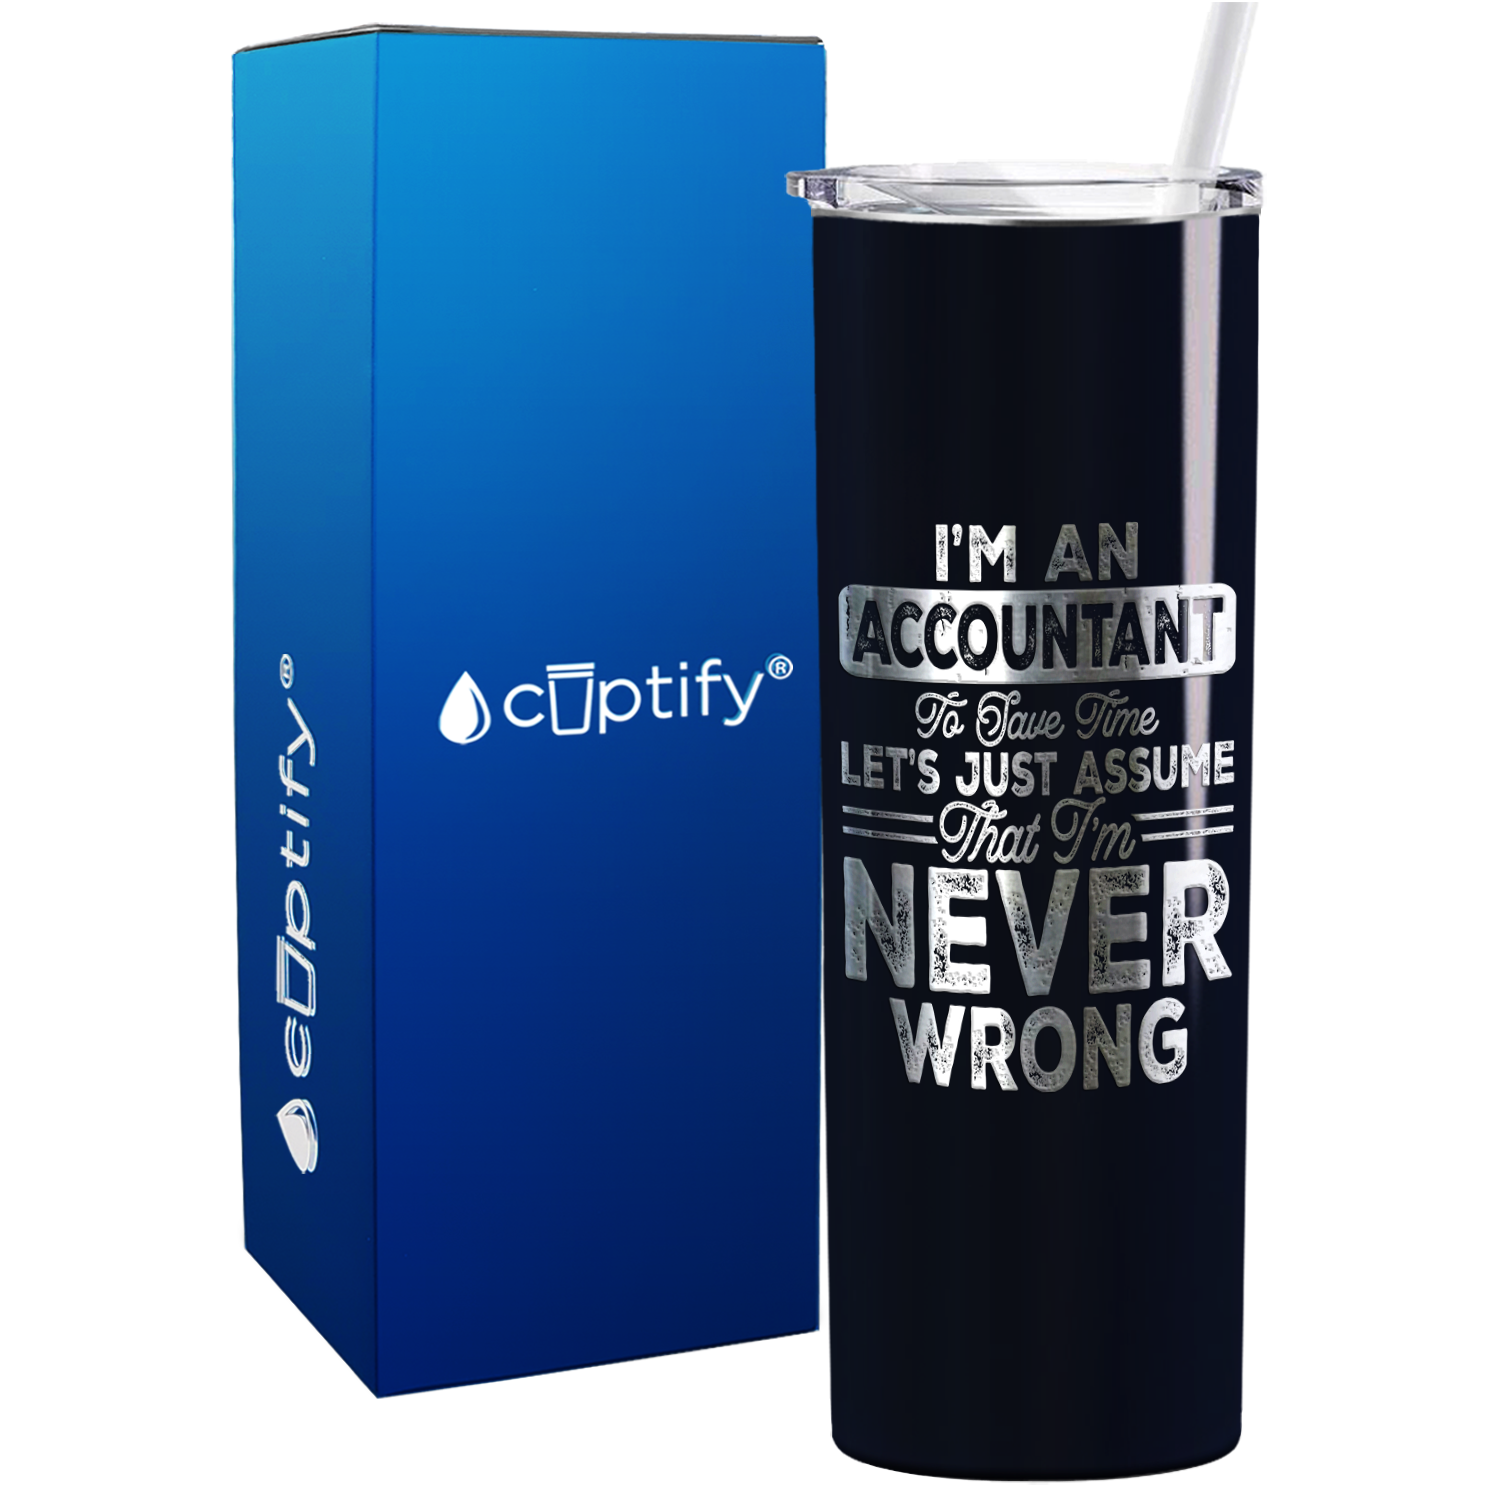 I'm an Accountant to save Time Lets Just Assume on 20oz Skinny Stainless Steel Tumbler